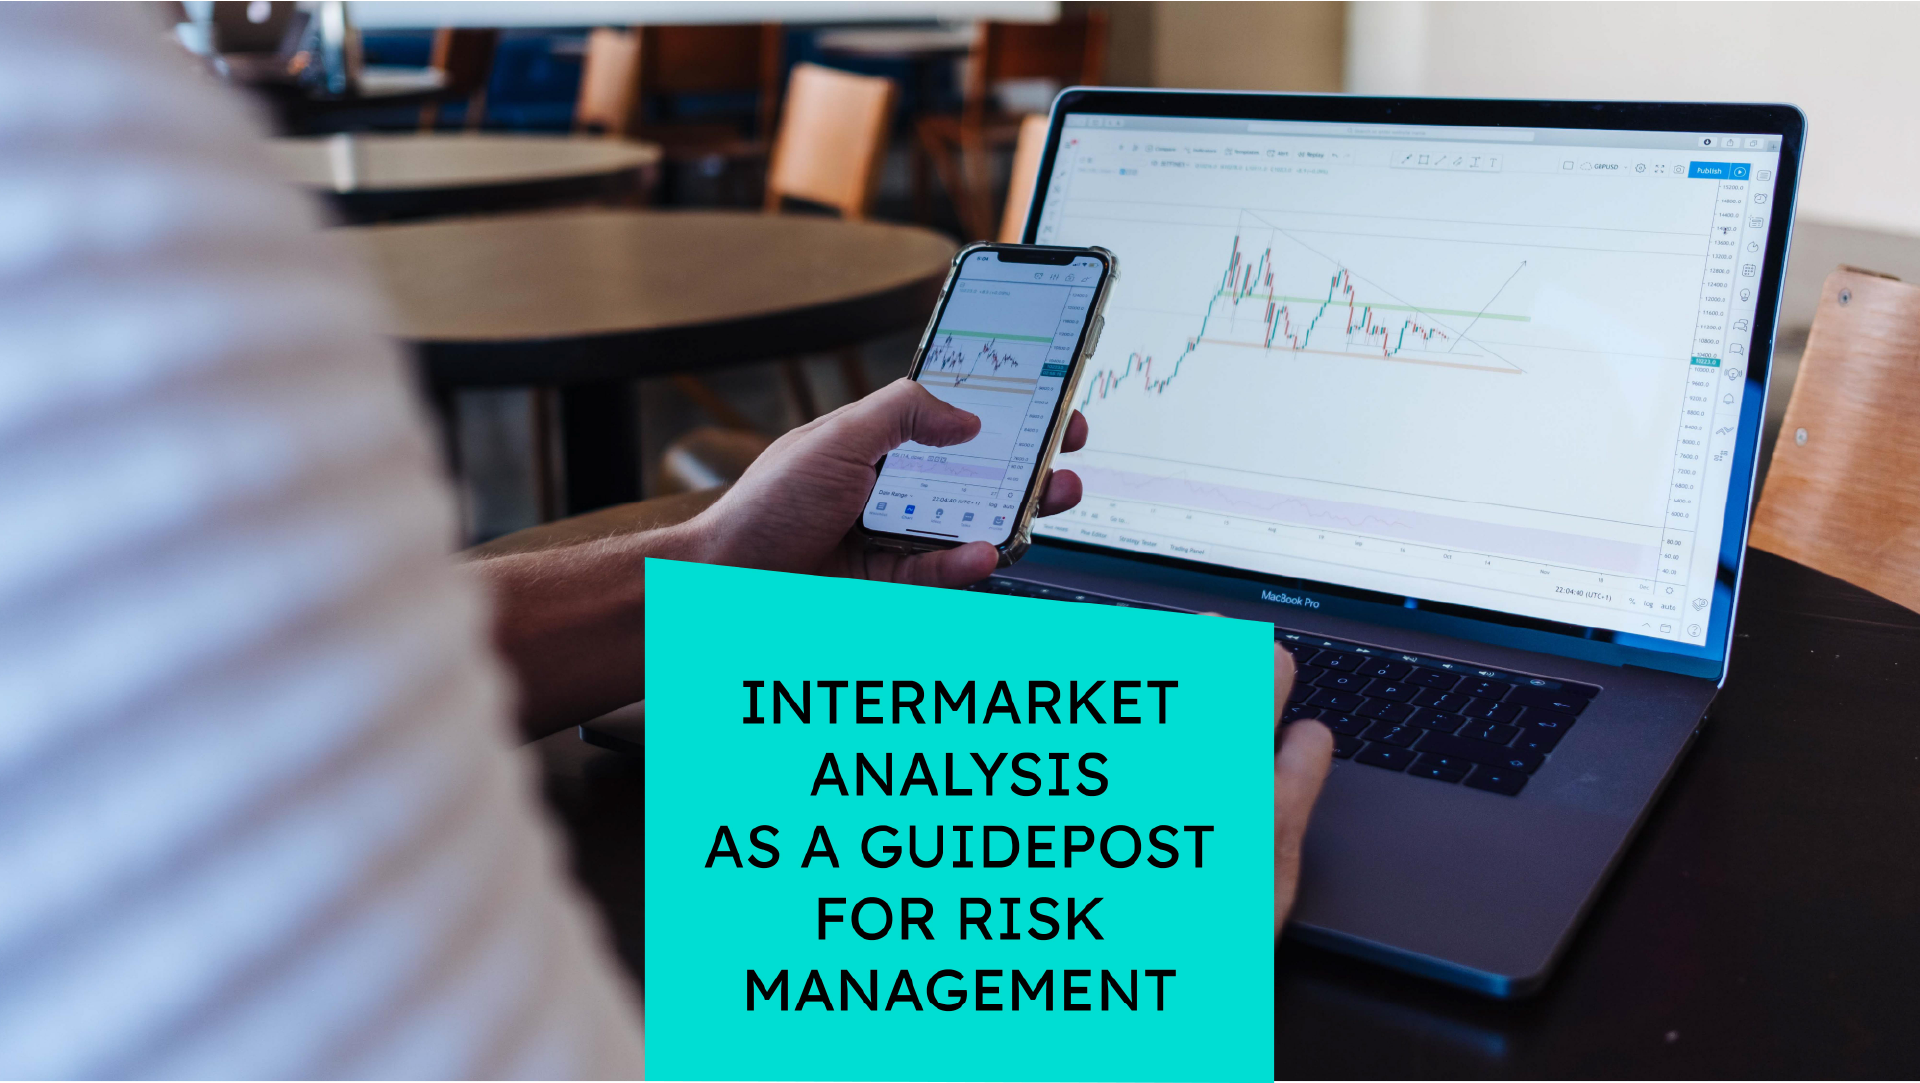 Intermarket Analysis as a Guidepost for Risk Management